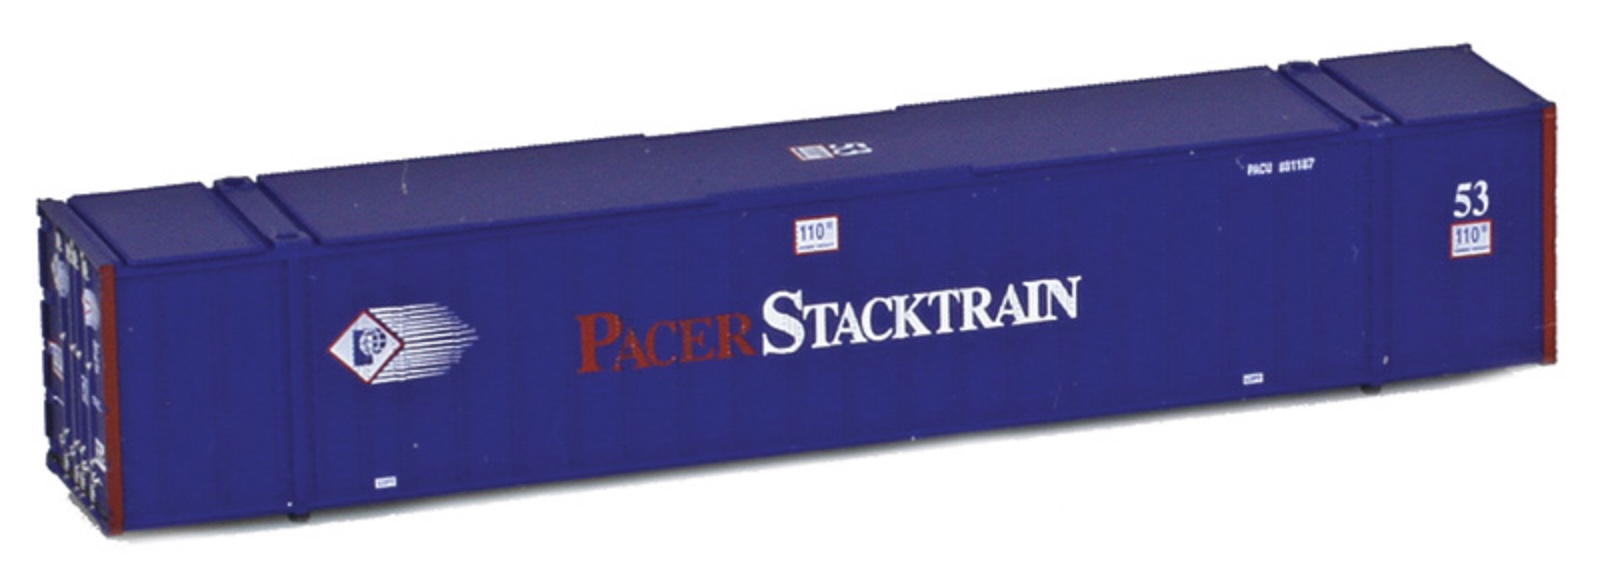 Z Scale - AZL - 95109-10 - Container, 53 Foot - Pacer StackTrain - 10-Pack